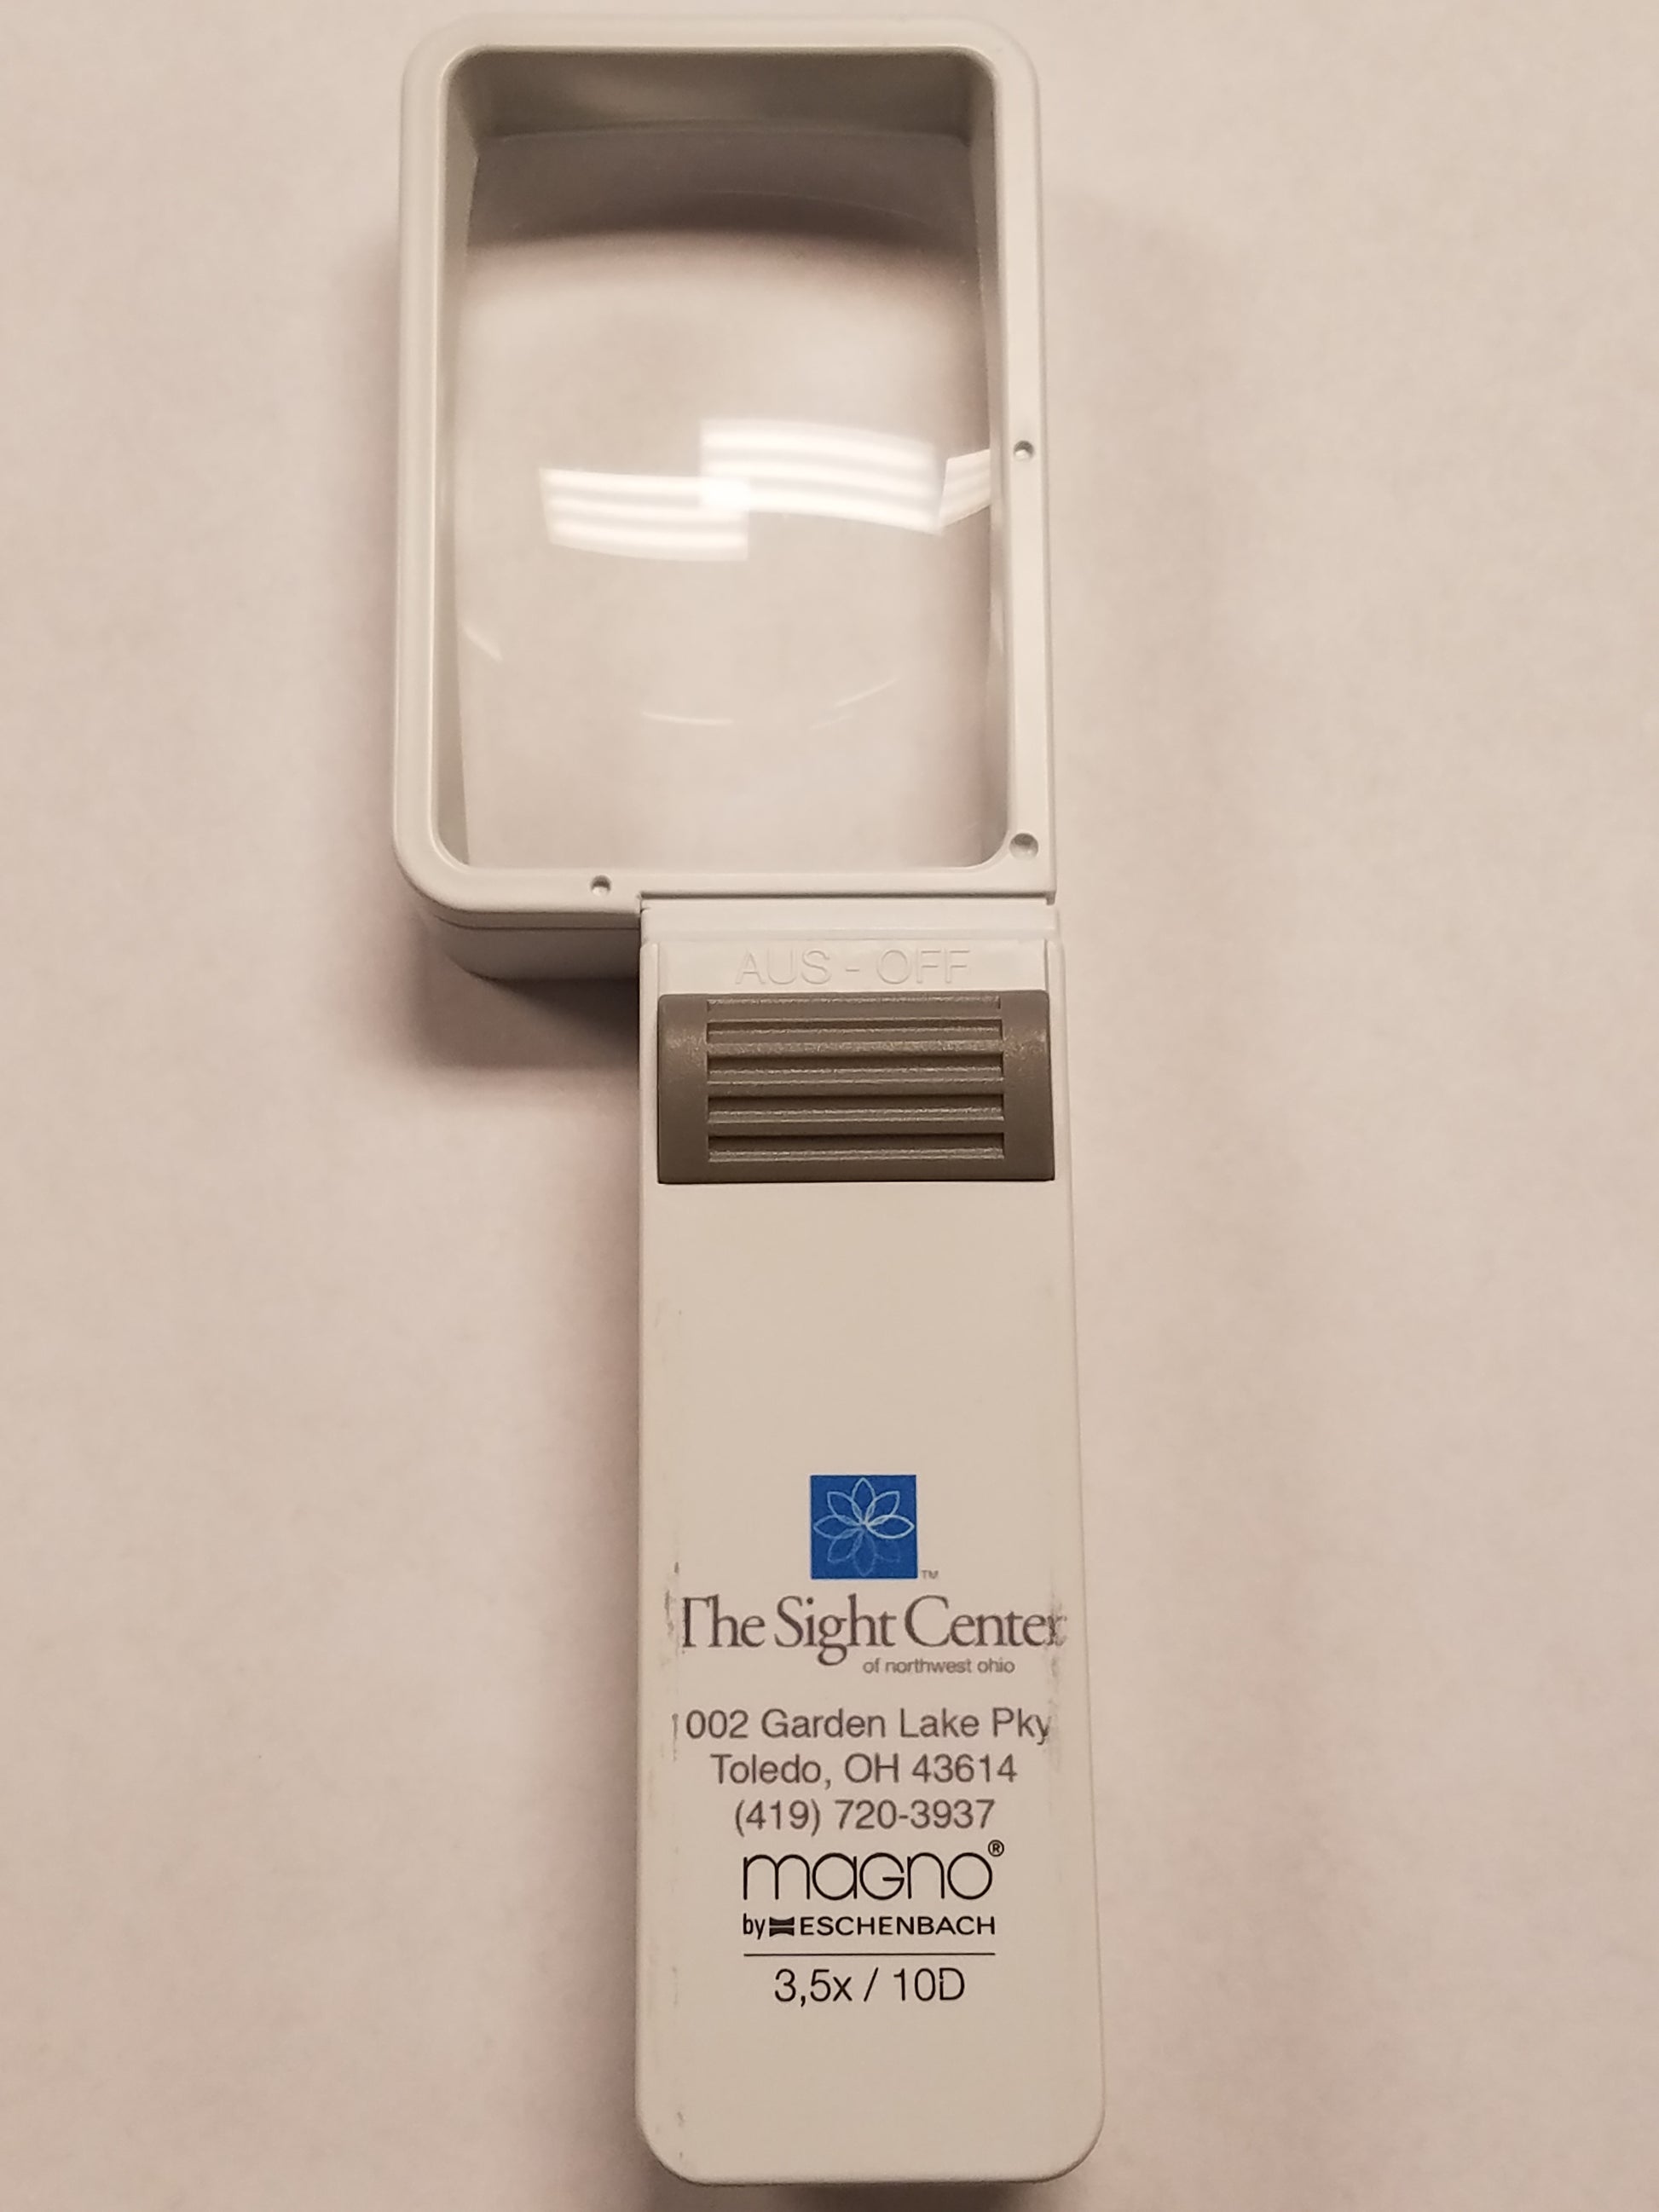 Eschenbach Magno Handheld Magnifier – The Shop at The Sight Center